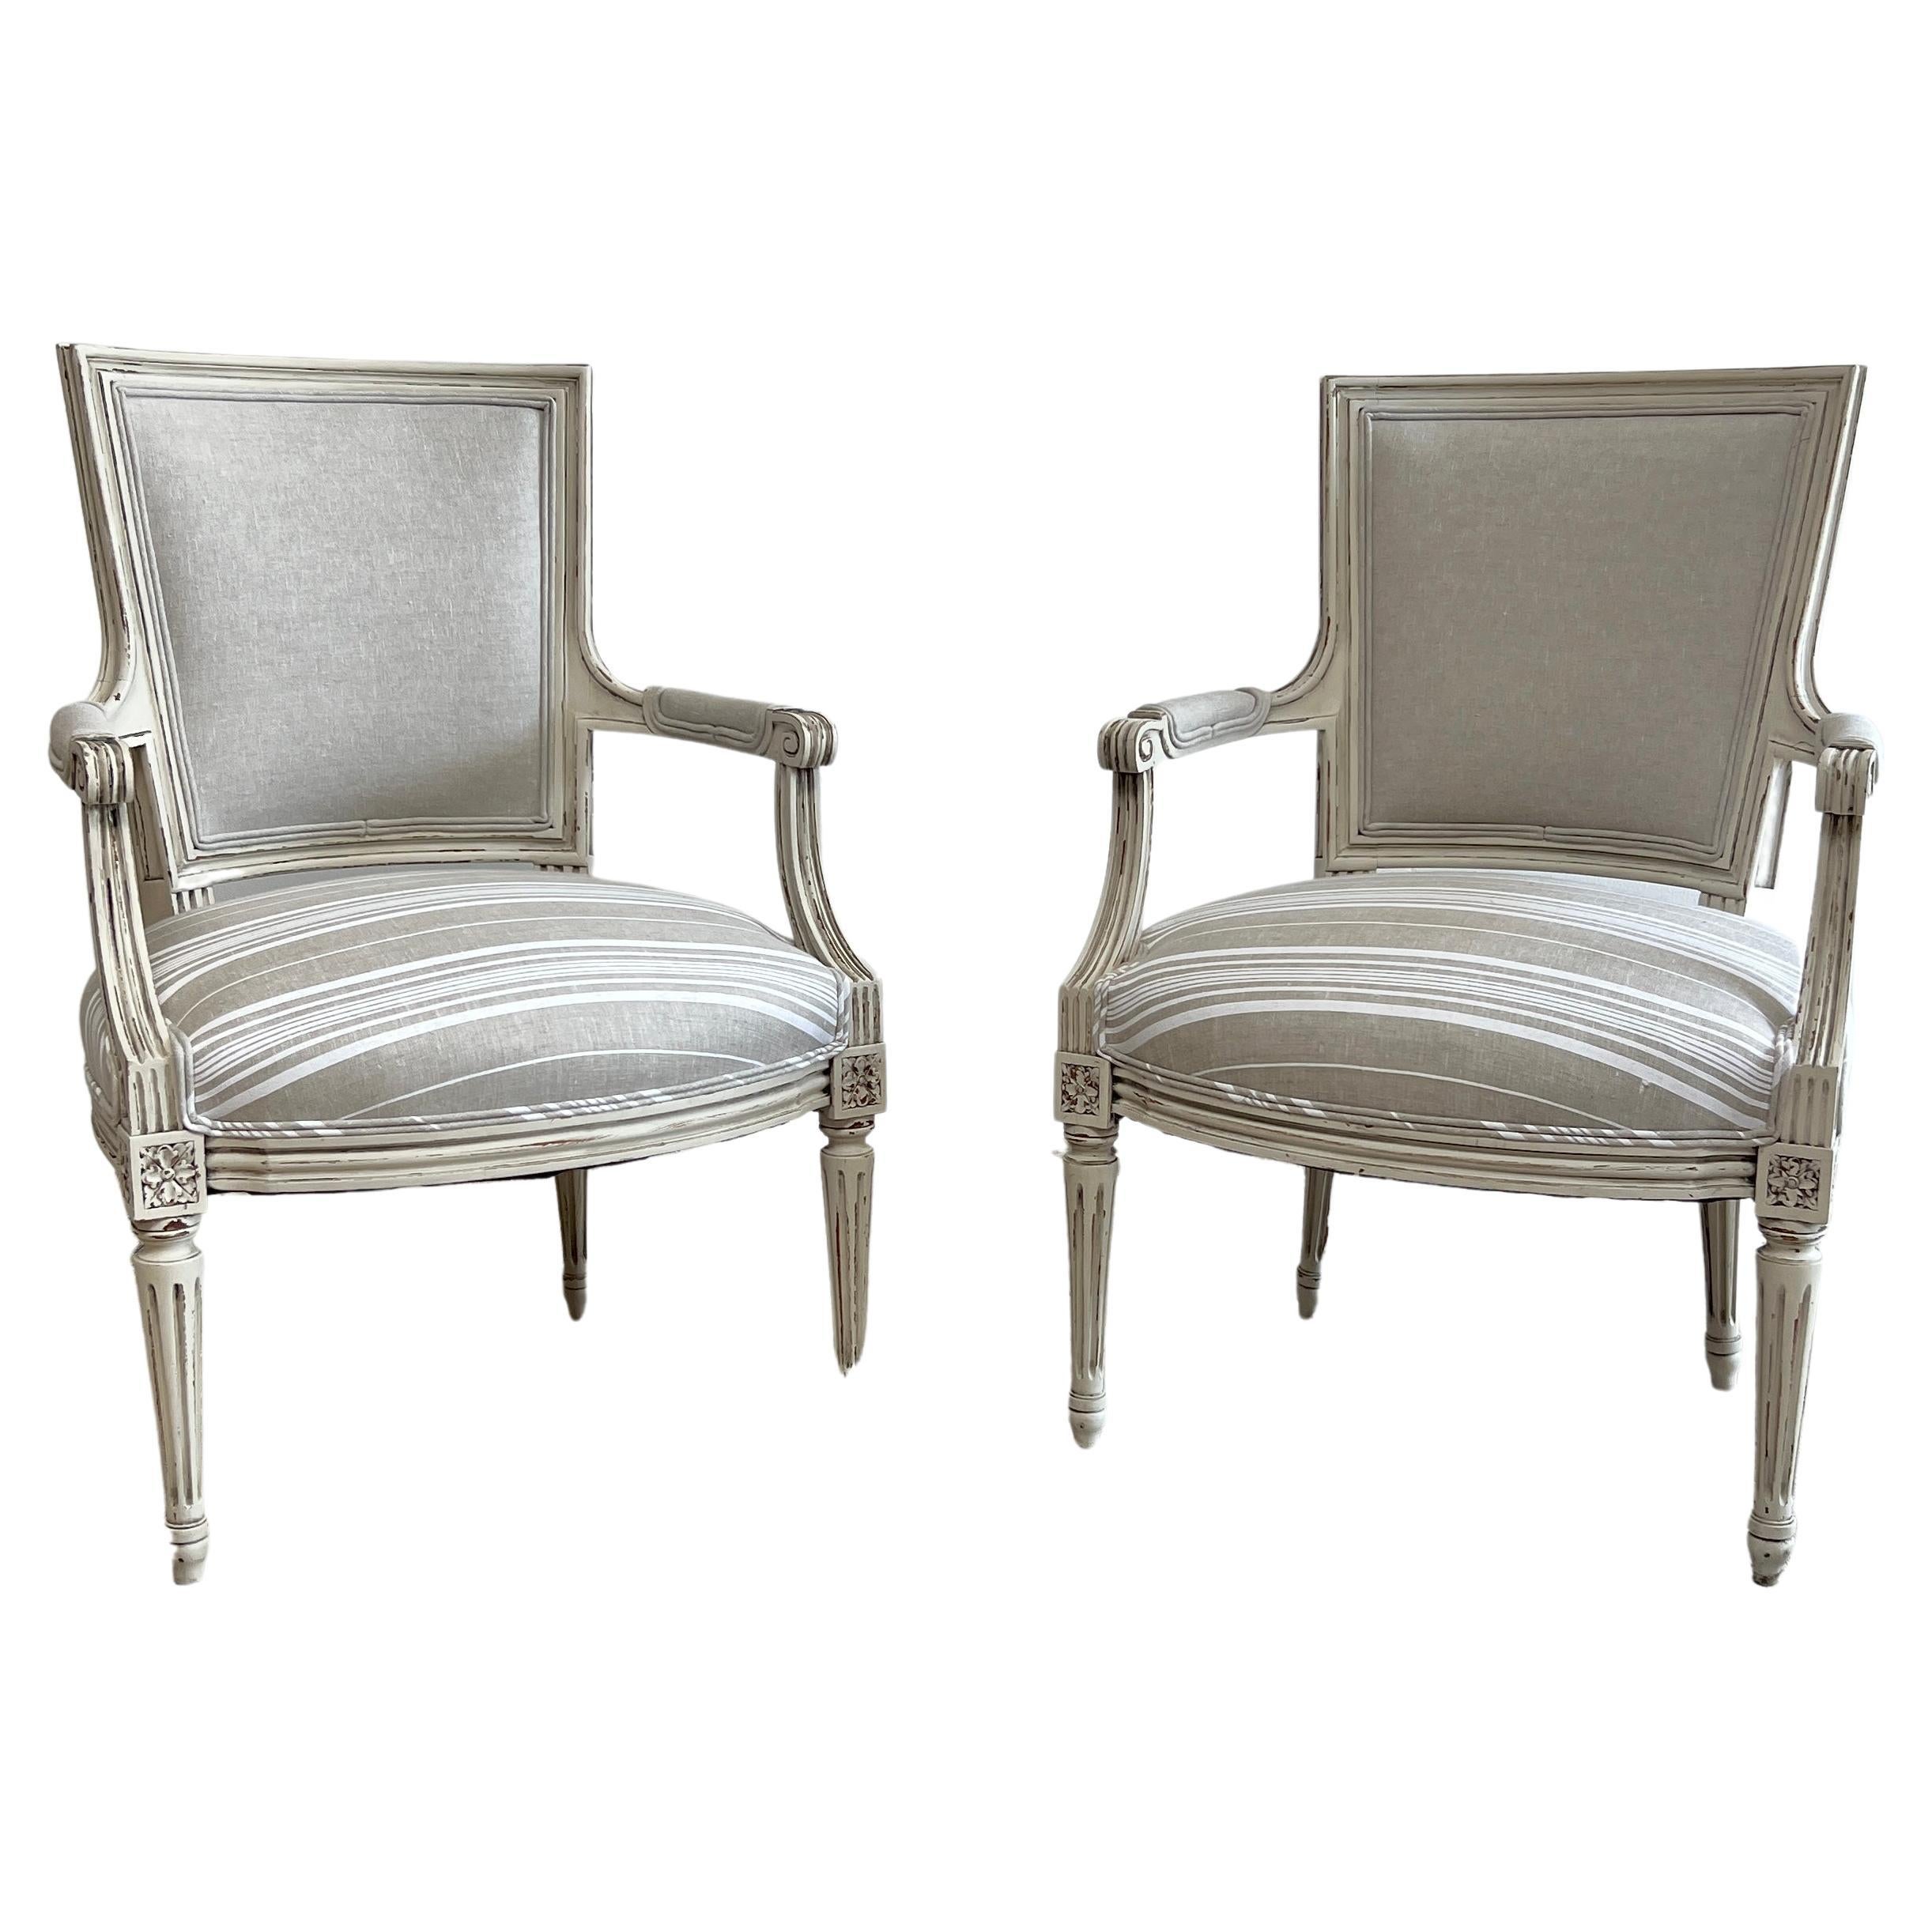 Vintage Pair of Painted and Upholstered French Louis XVI Style Open Arm Chairs For Sale